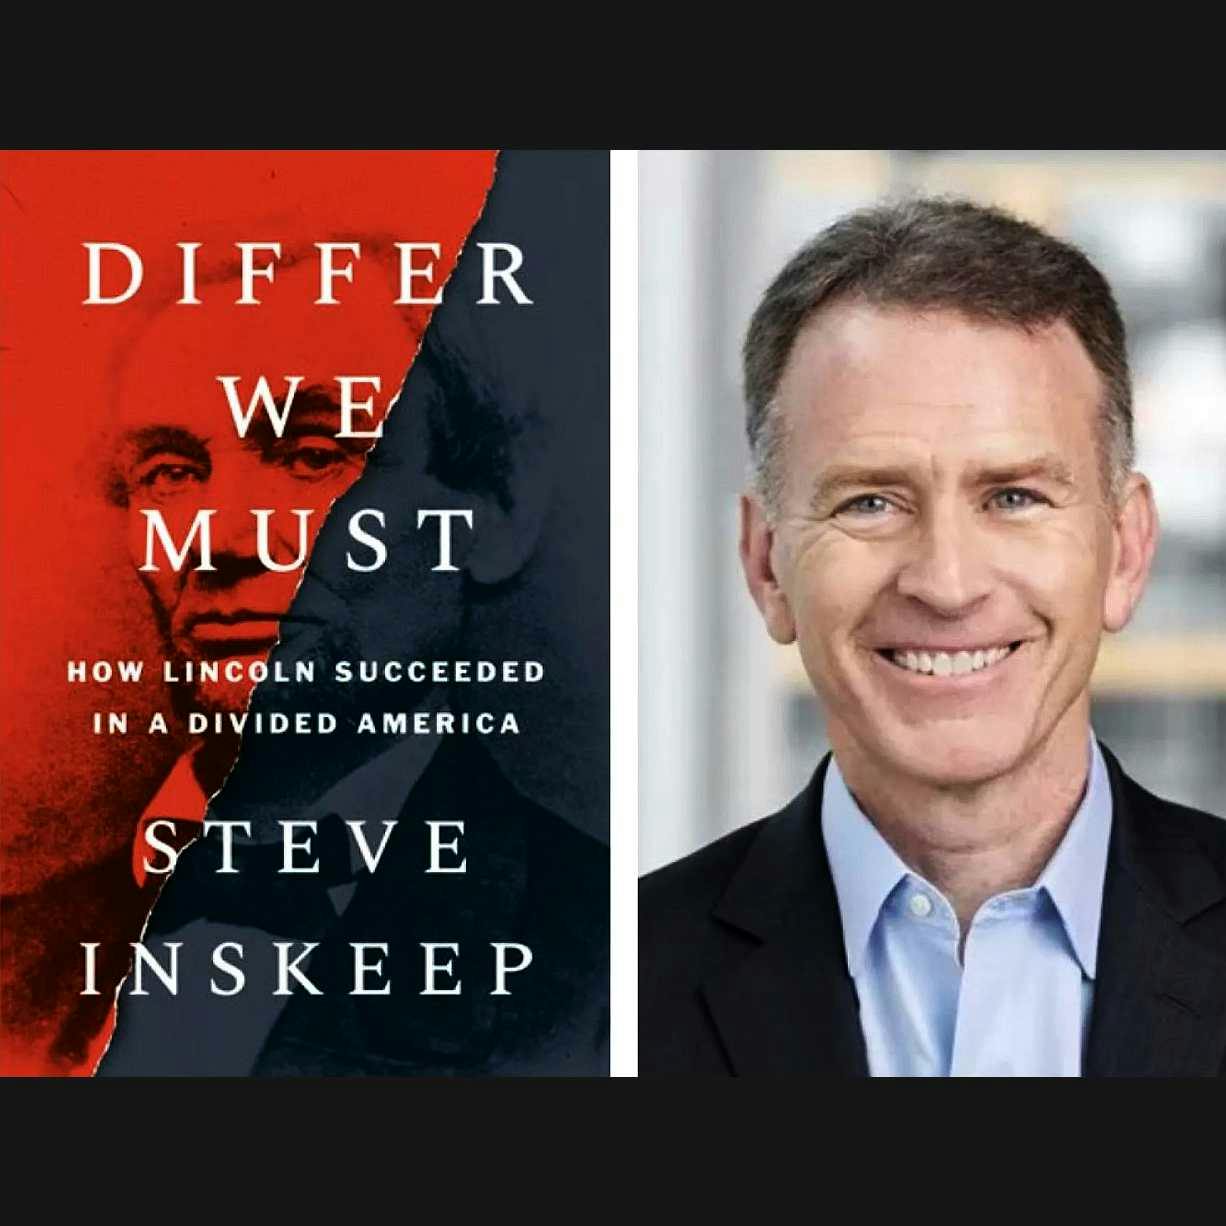 Steve Inskeep on Lincoln’s Leadership in Turbulent Times